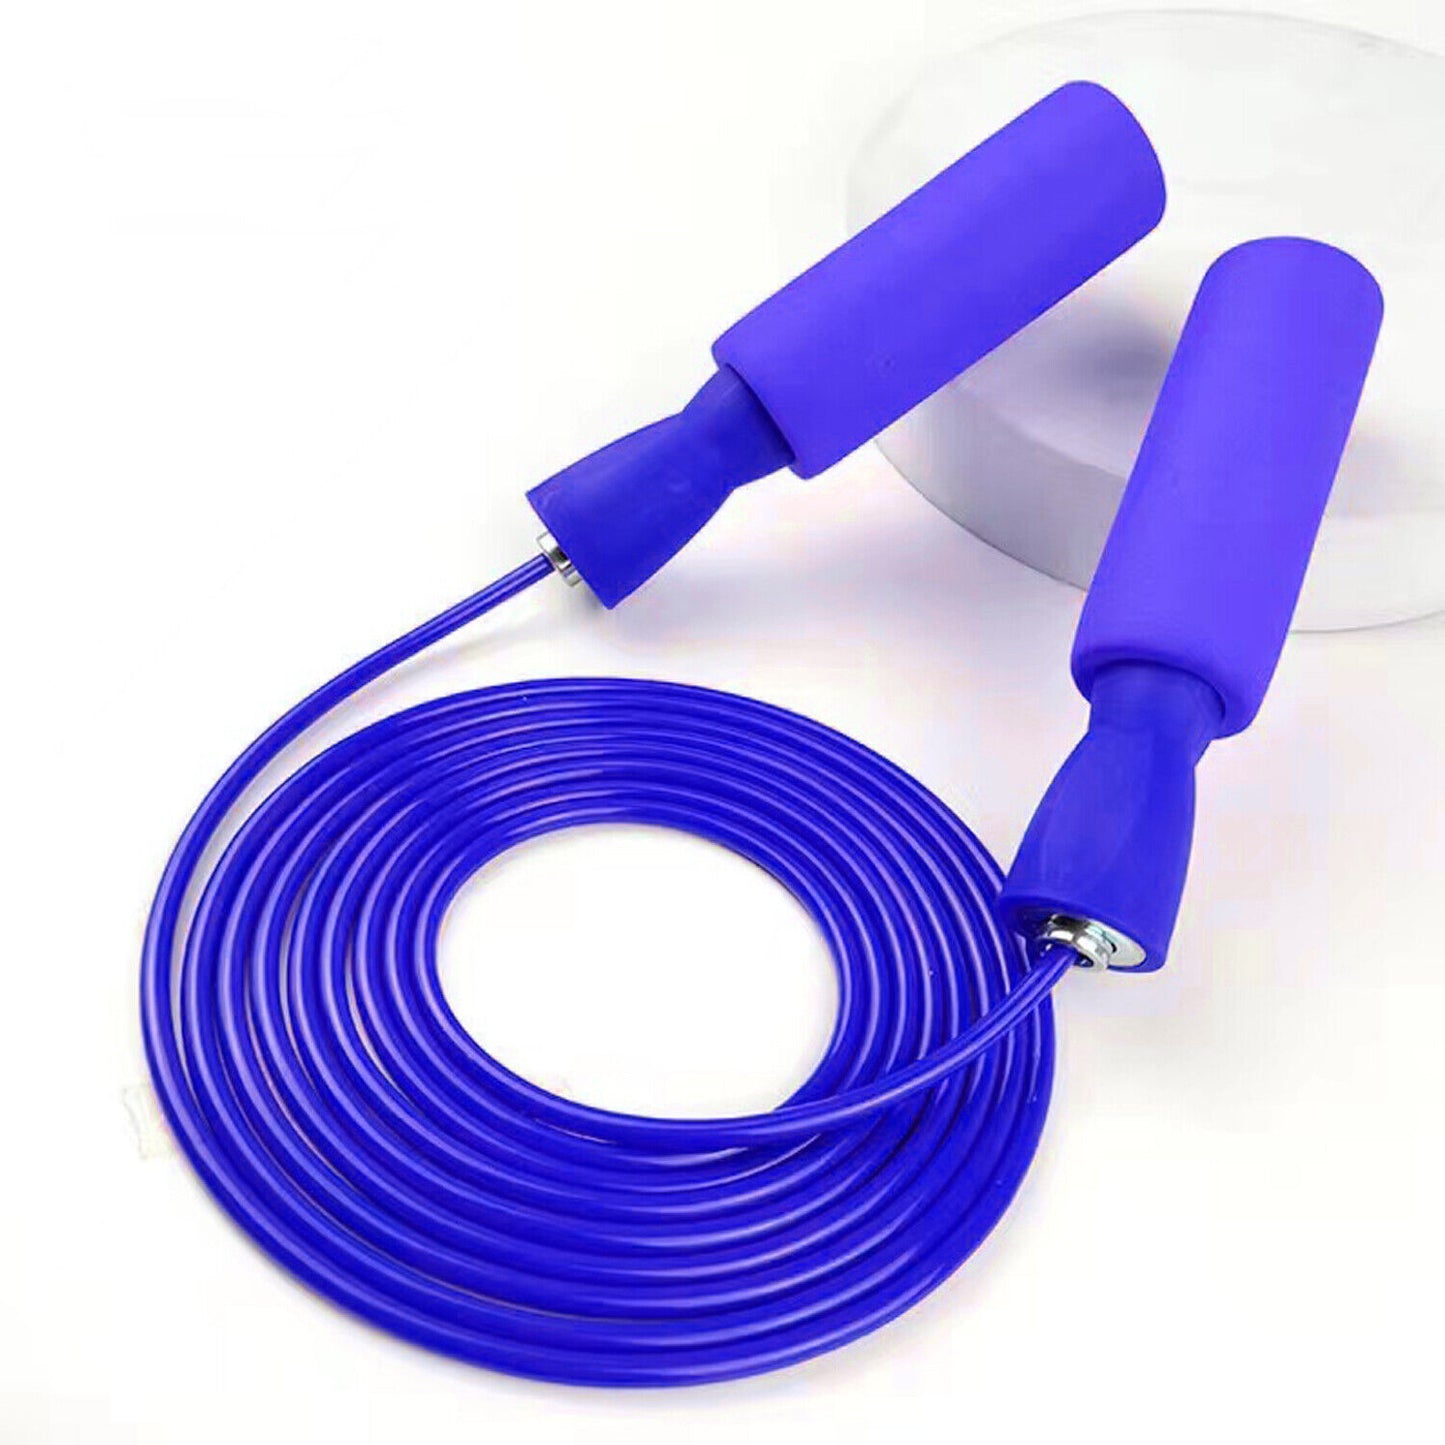 SKIPPING-ROPE-BLUE